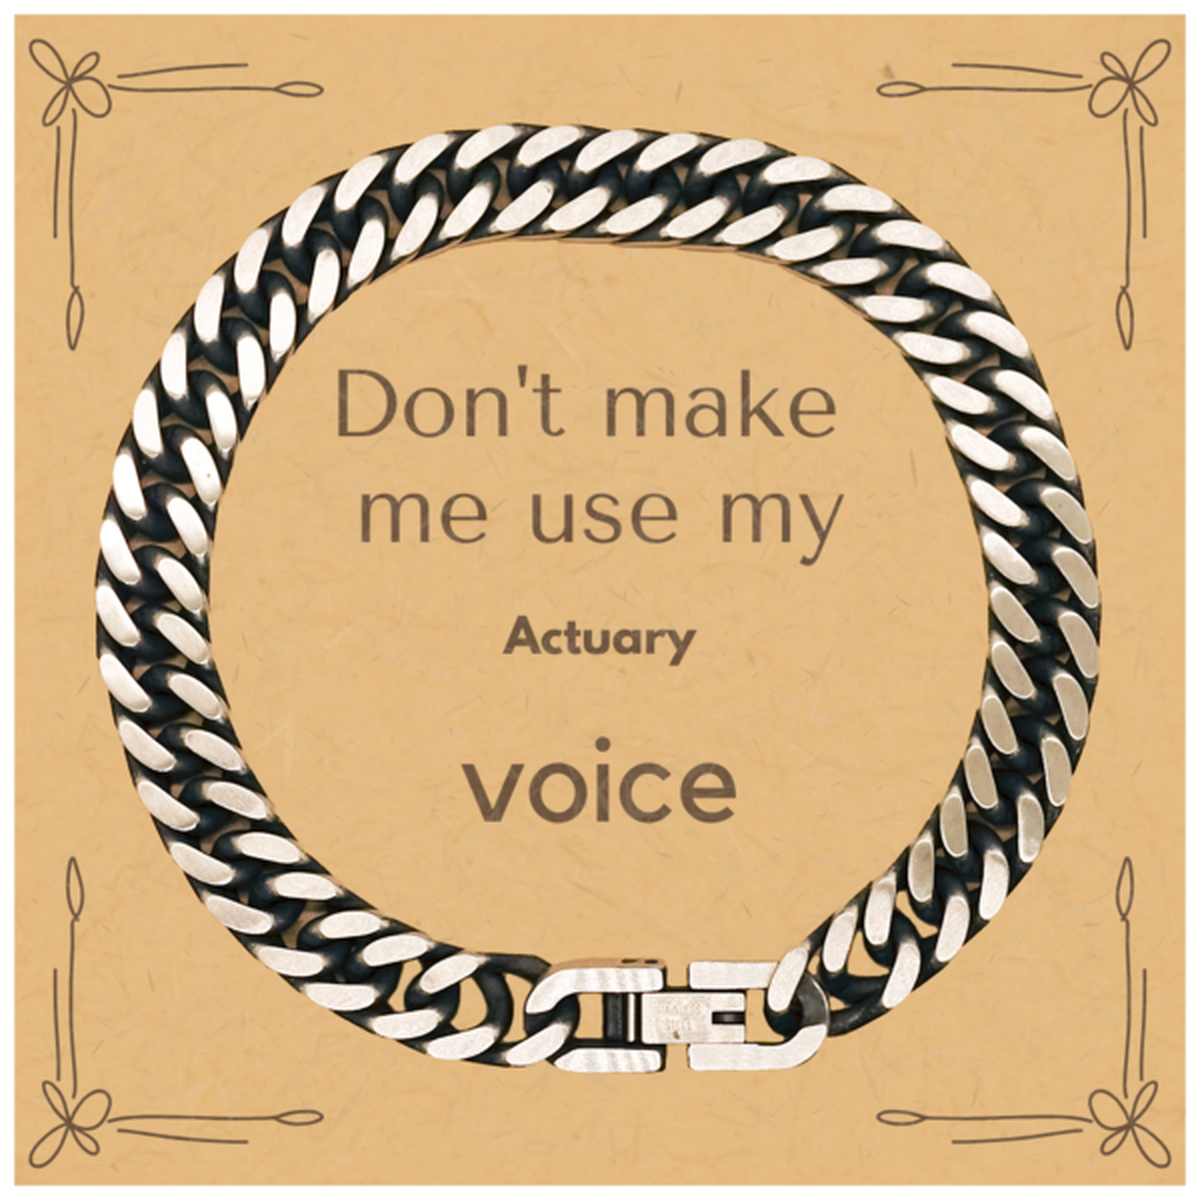 Don't make me use my Actuary voice, Sarcasm Actuary Card Gifts, Christmas Actuary Cuban Link Chain Bracelet Birthday Unique Gifts For Actuary Coworkers, Men, Women, Colleague, Friends